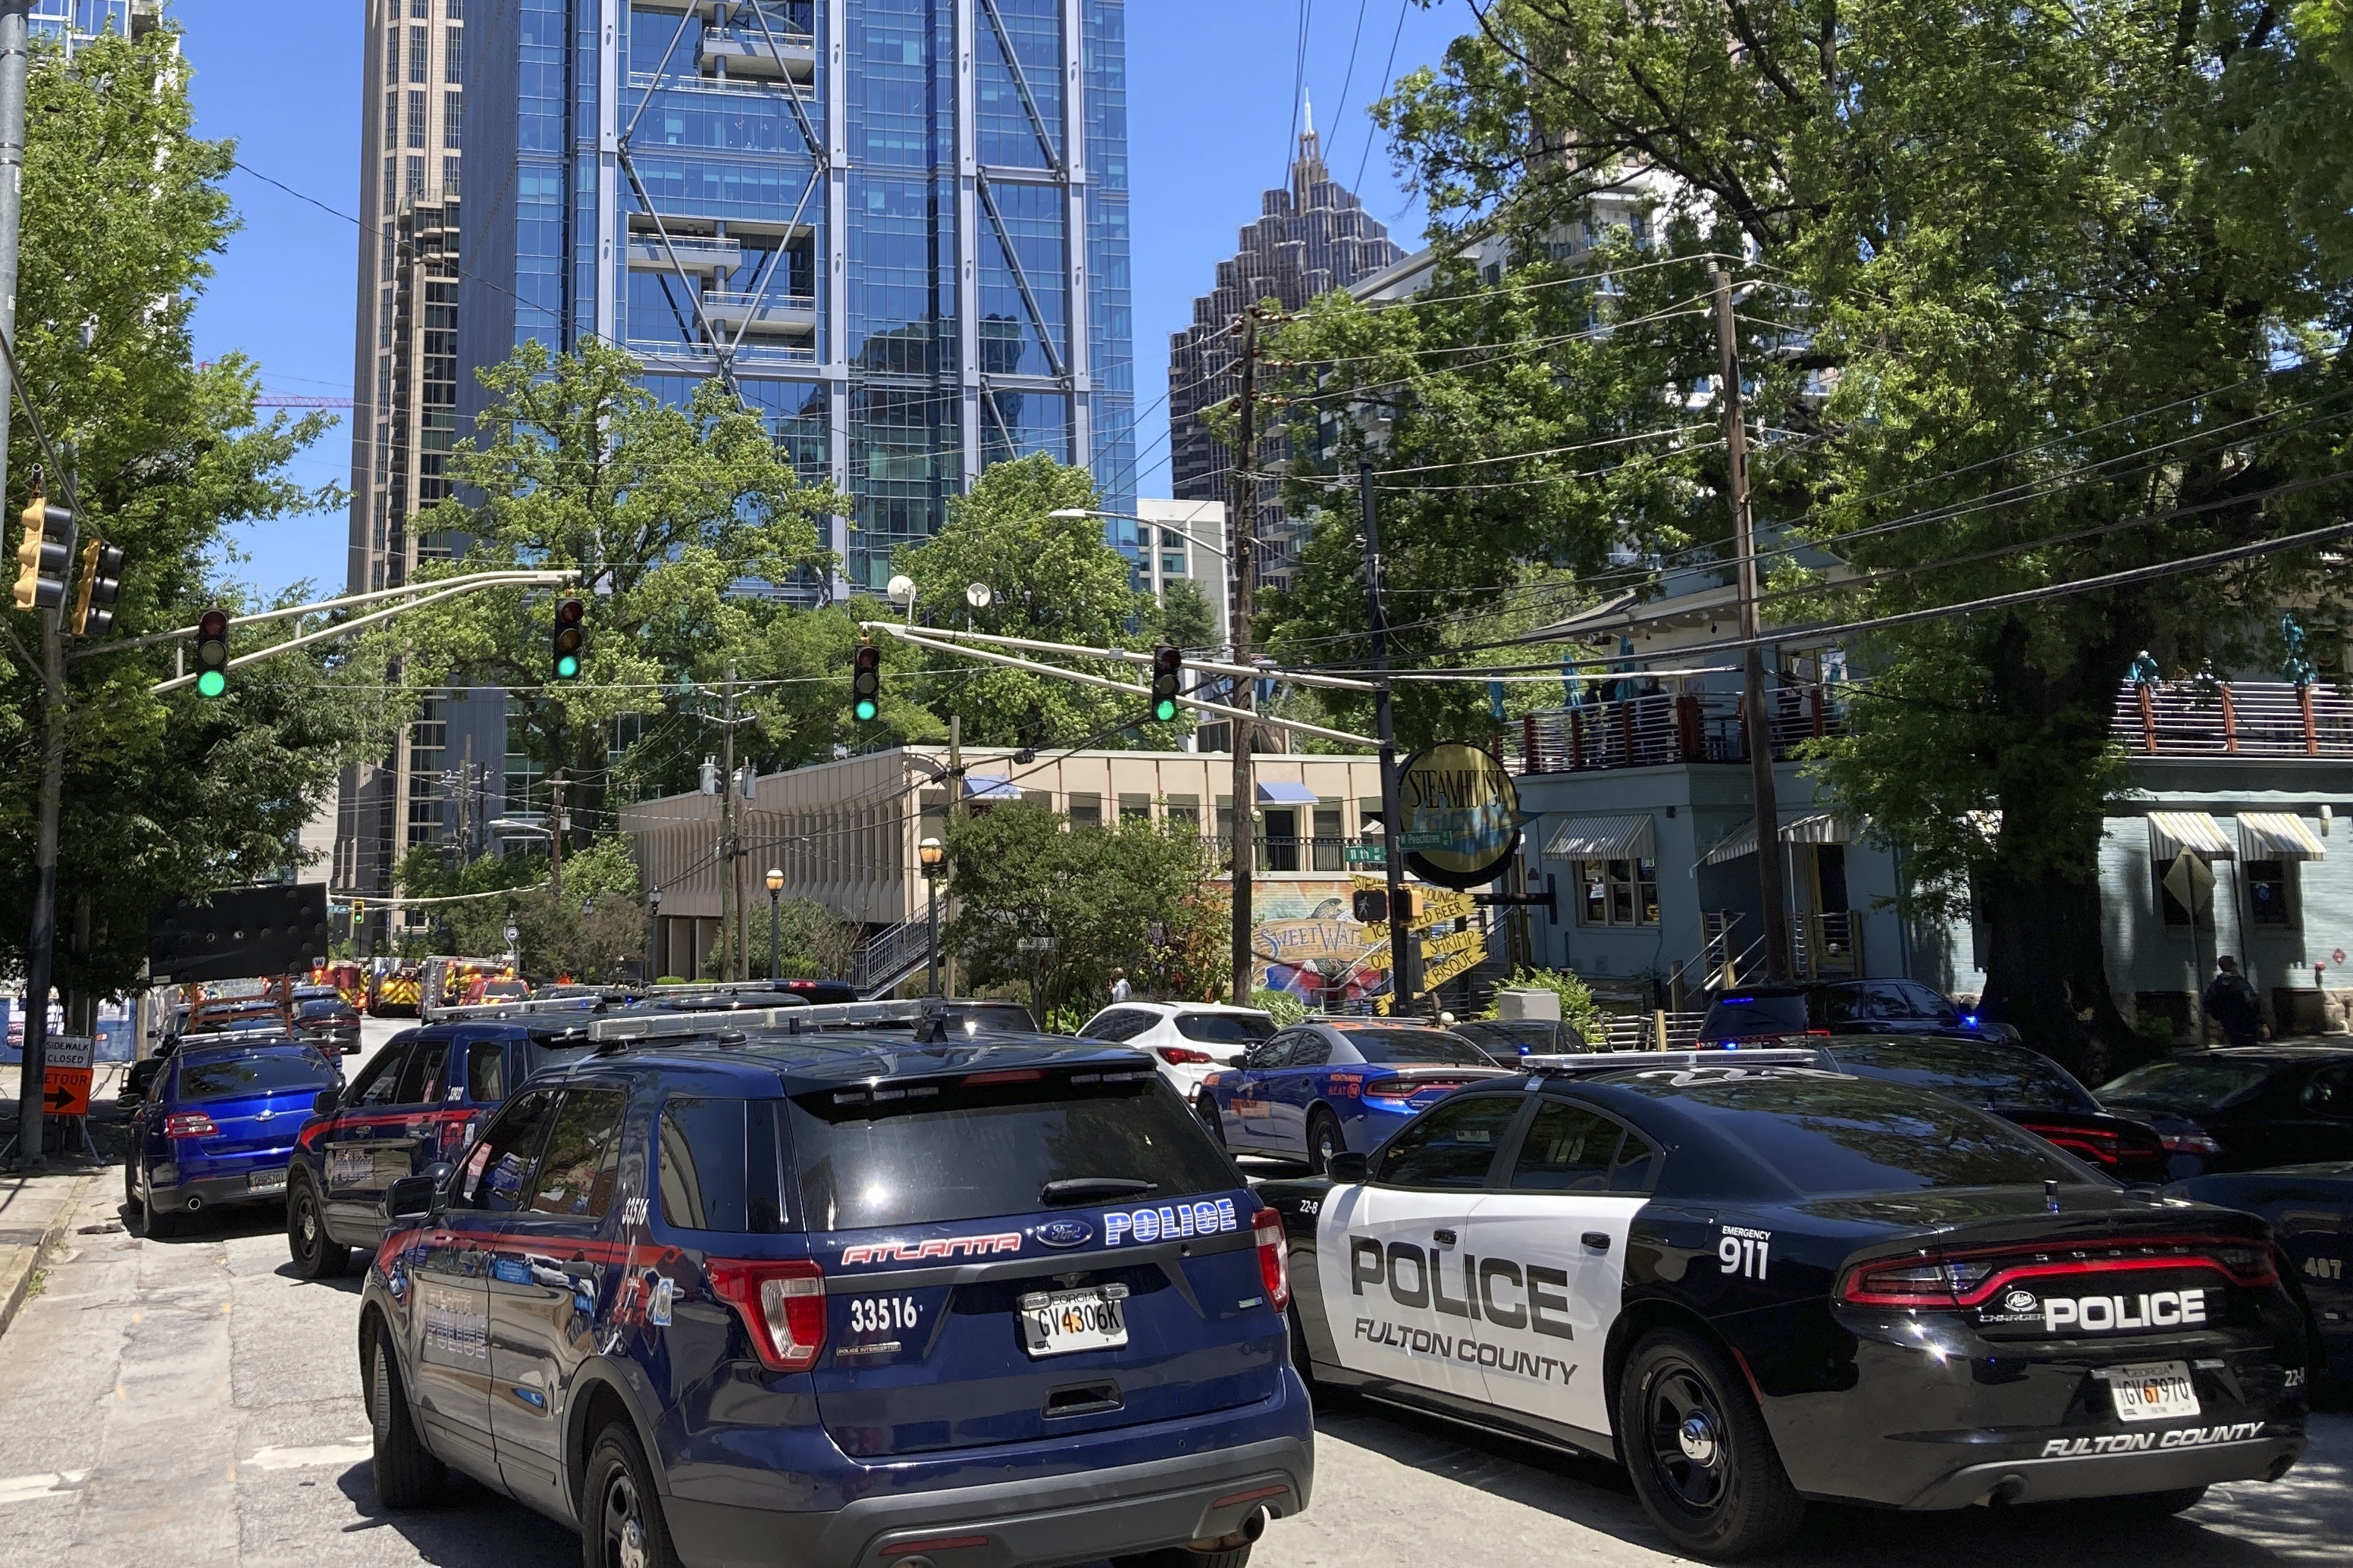 Emergency vehicles arrive on W. Peachtree in Atlanta, May 3, 2023. At least one person died, with three others injured, during a shooting in midtown Atlanta.